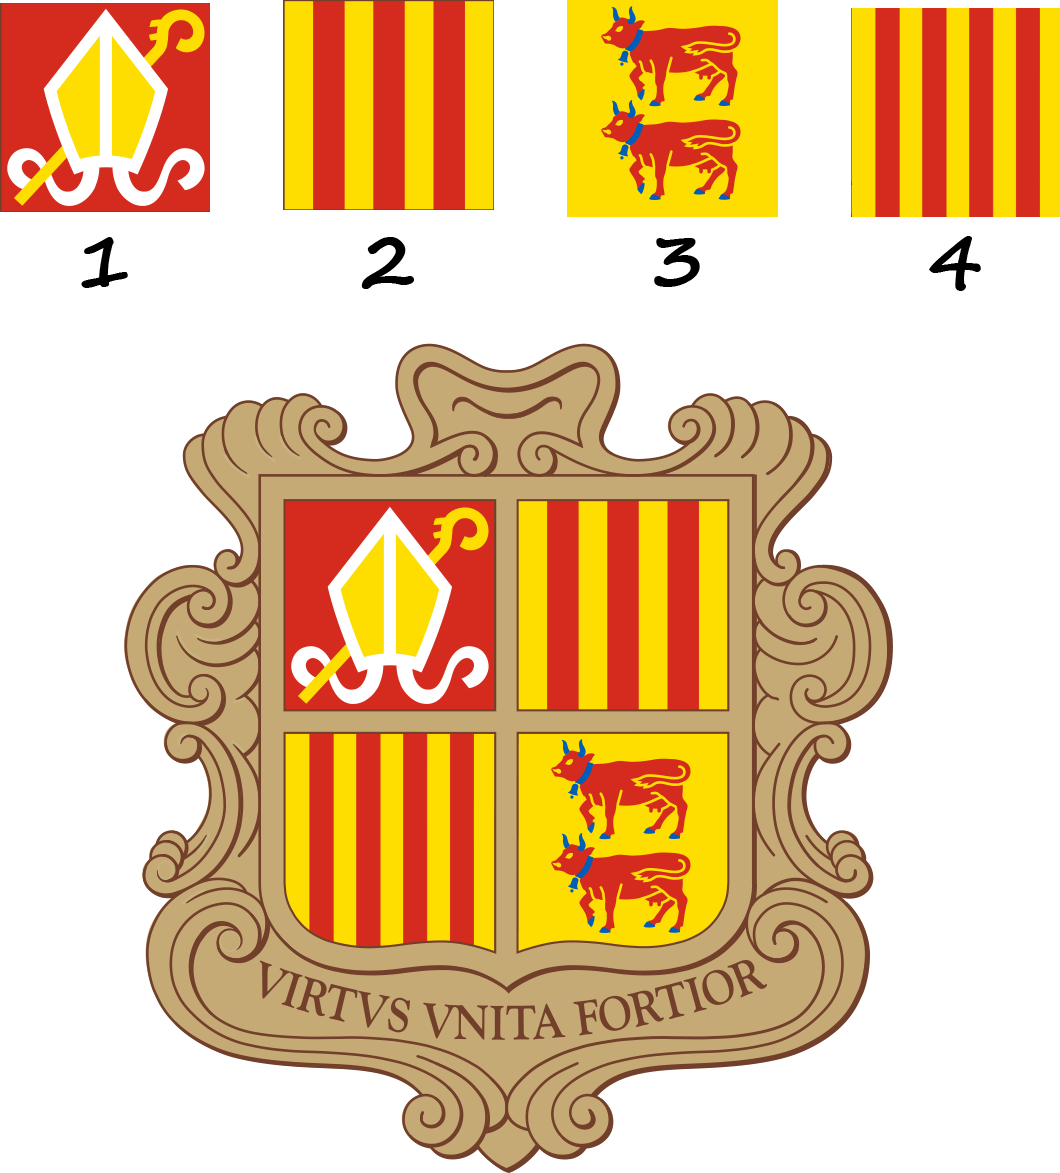 What do the symbols on the coat of arms of Andorra mean?